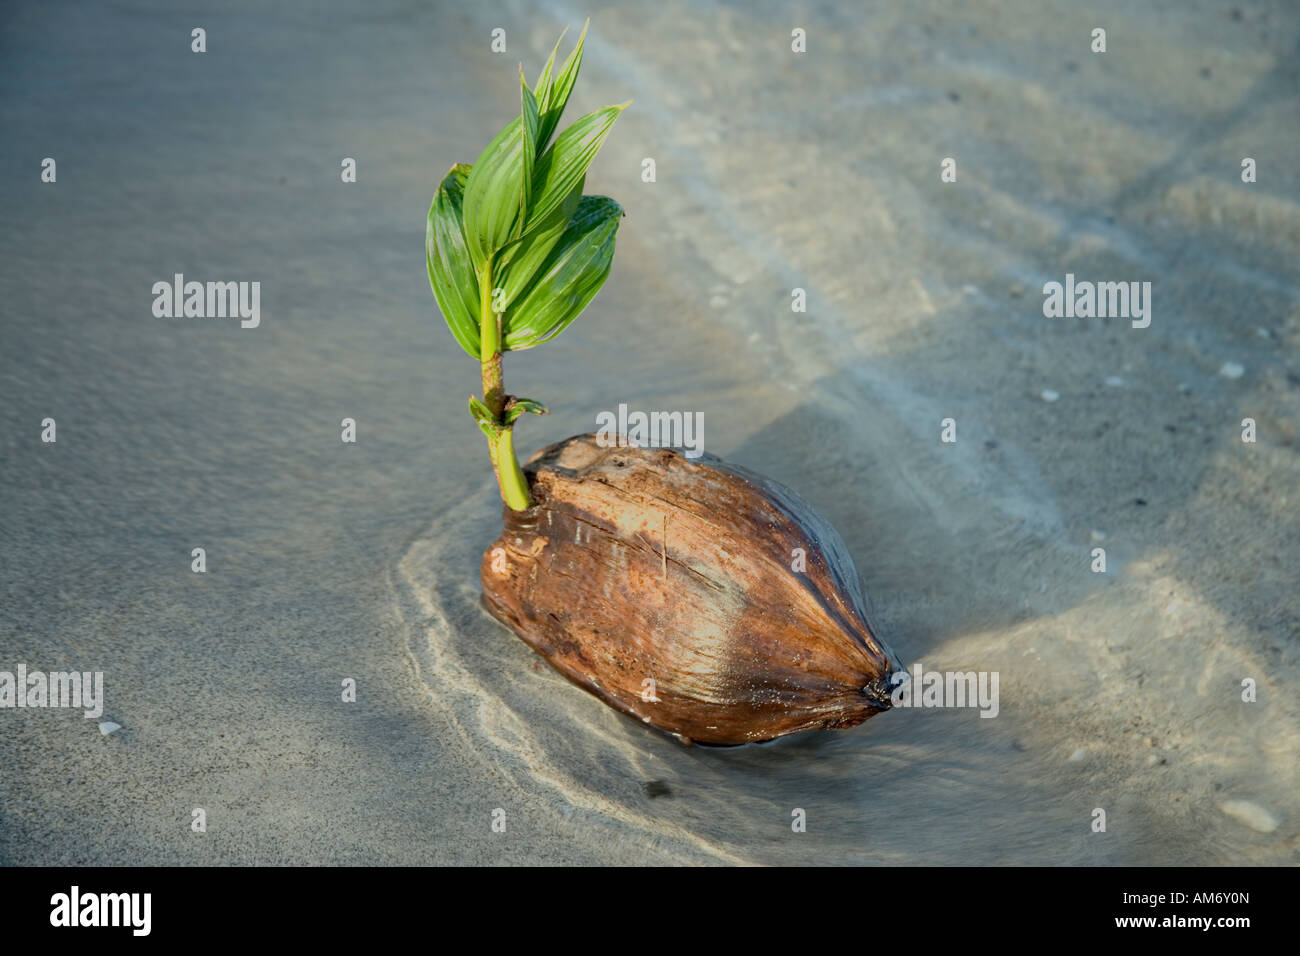 Beached coconut sprouting. Stock Photo